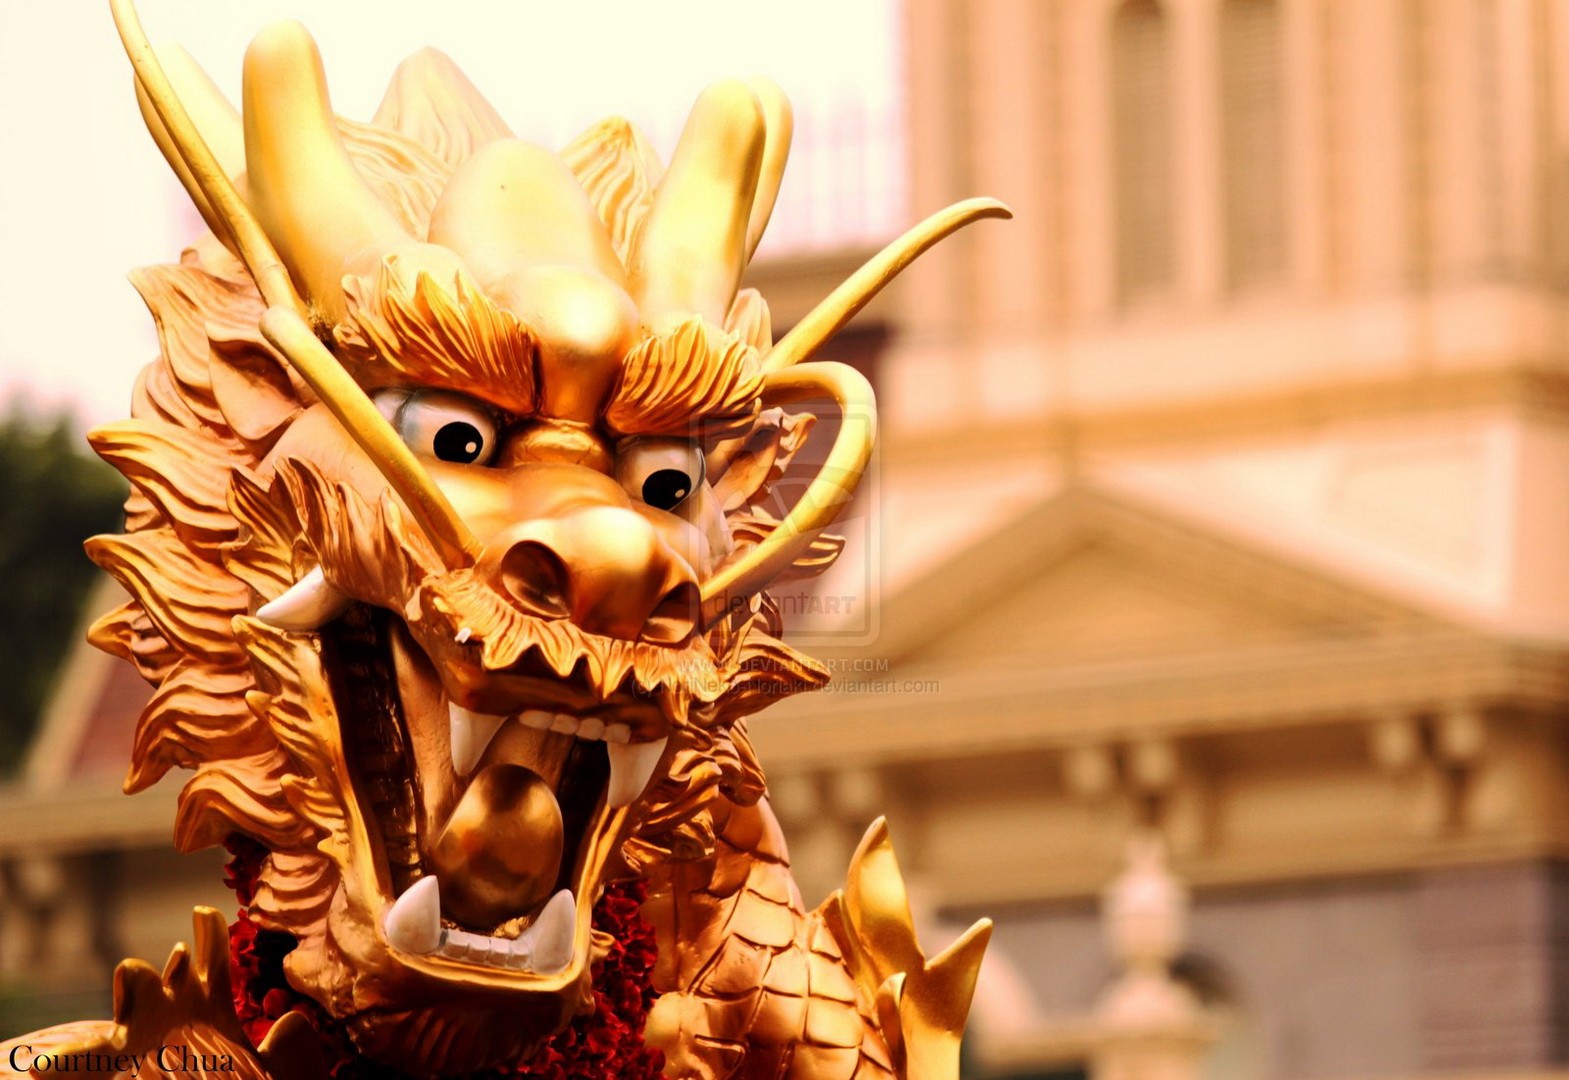 General 1569x1080 Chinese dragon dragon statue culture Asia closeup watermarked blurred blurry background